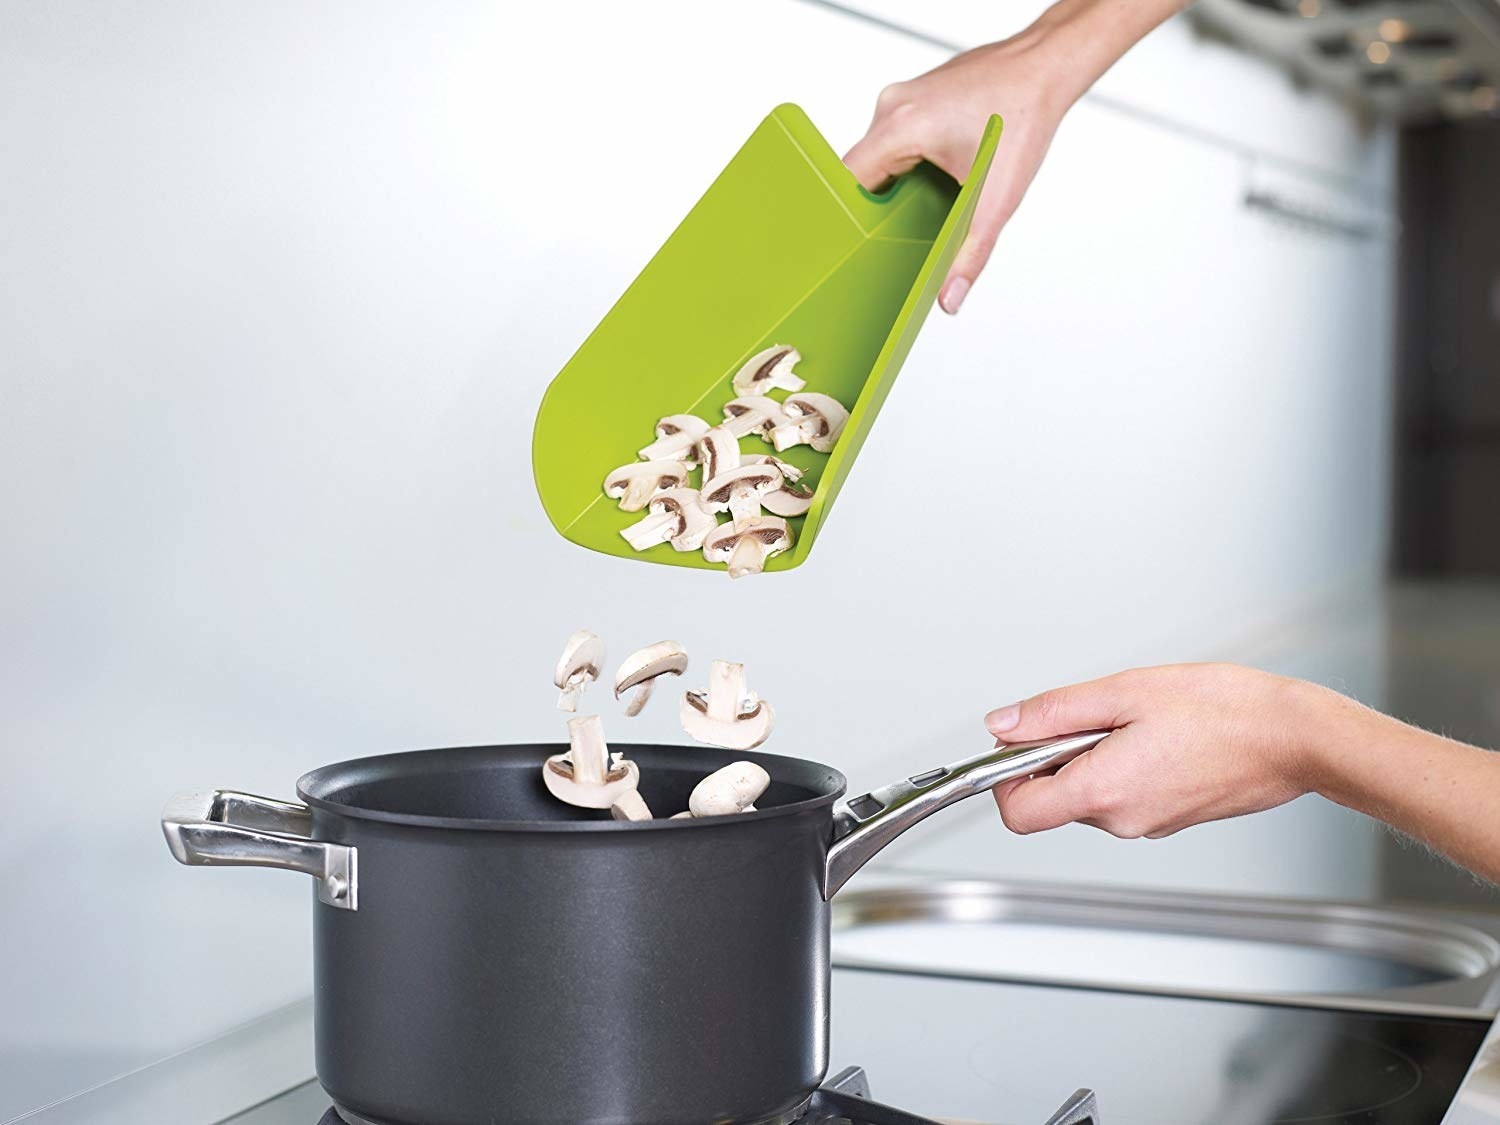 Green cutting board transporting mushrooms into stovetop 